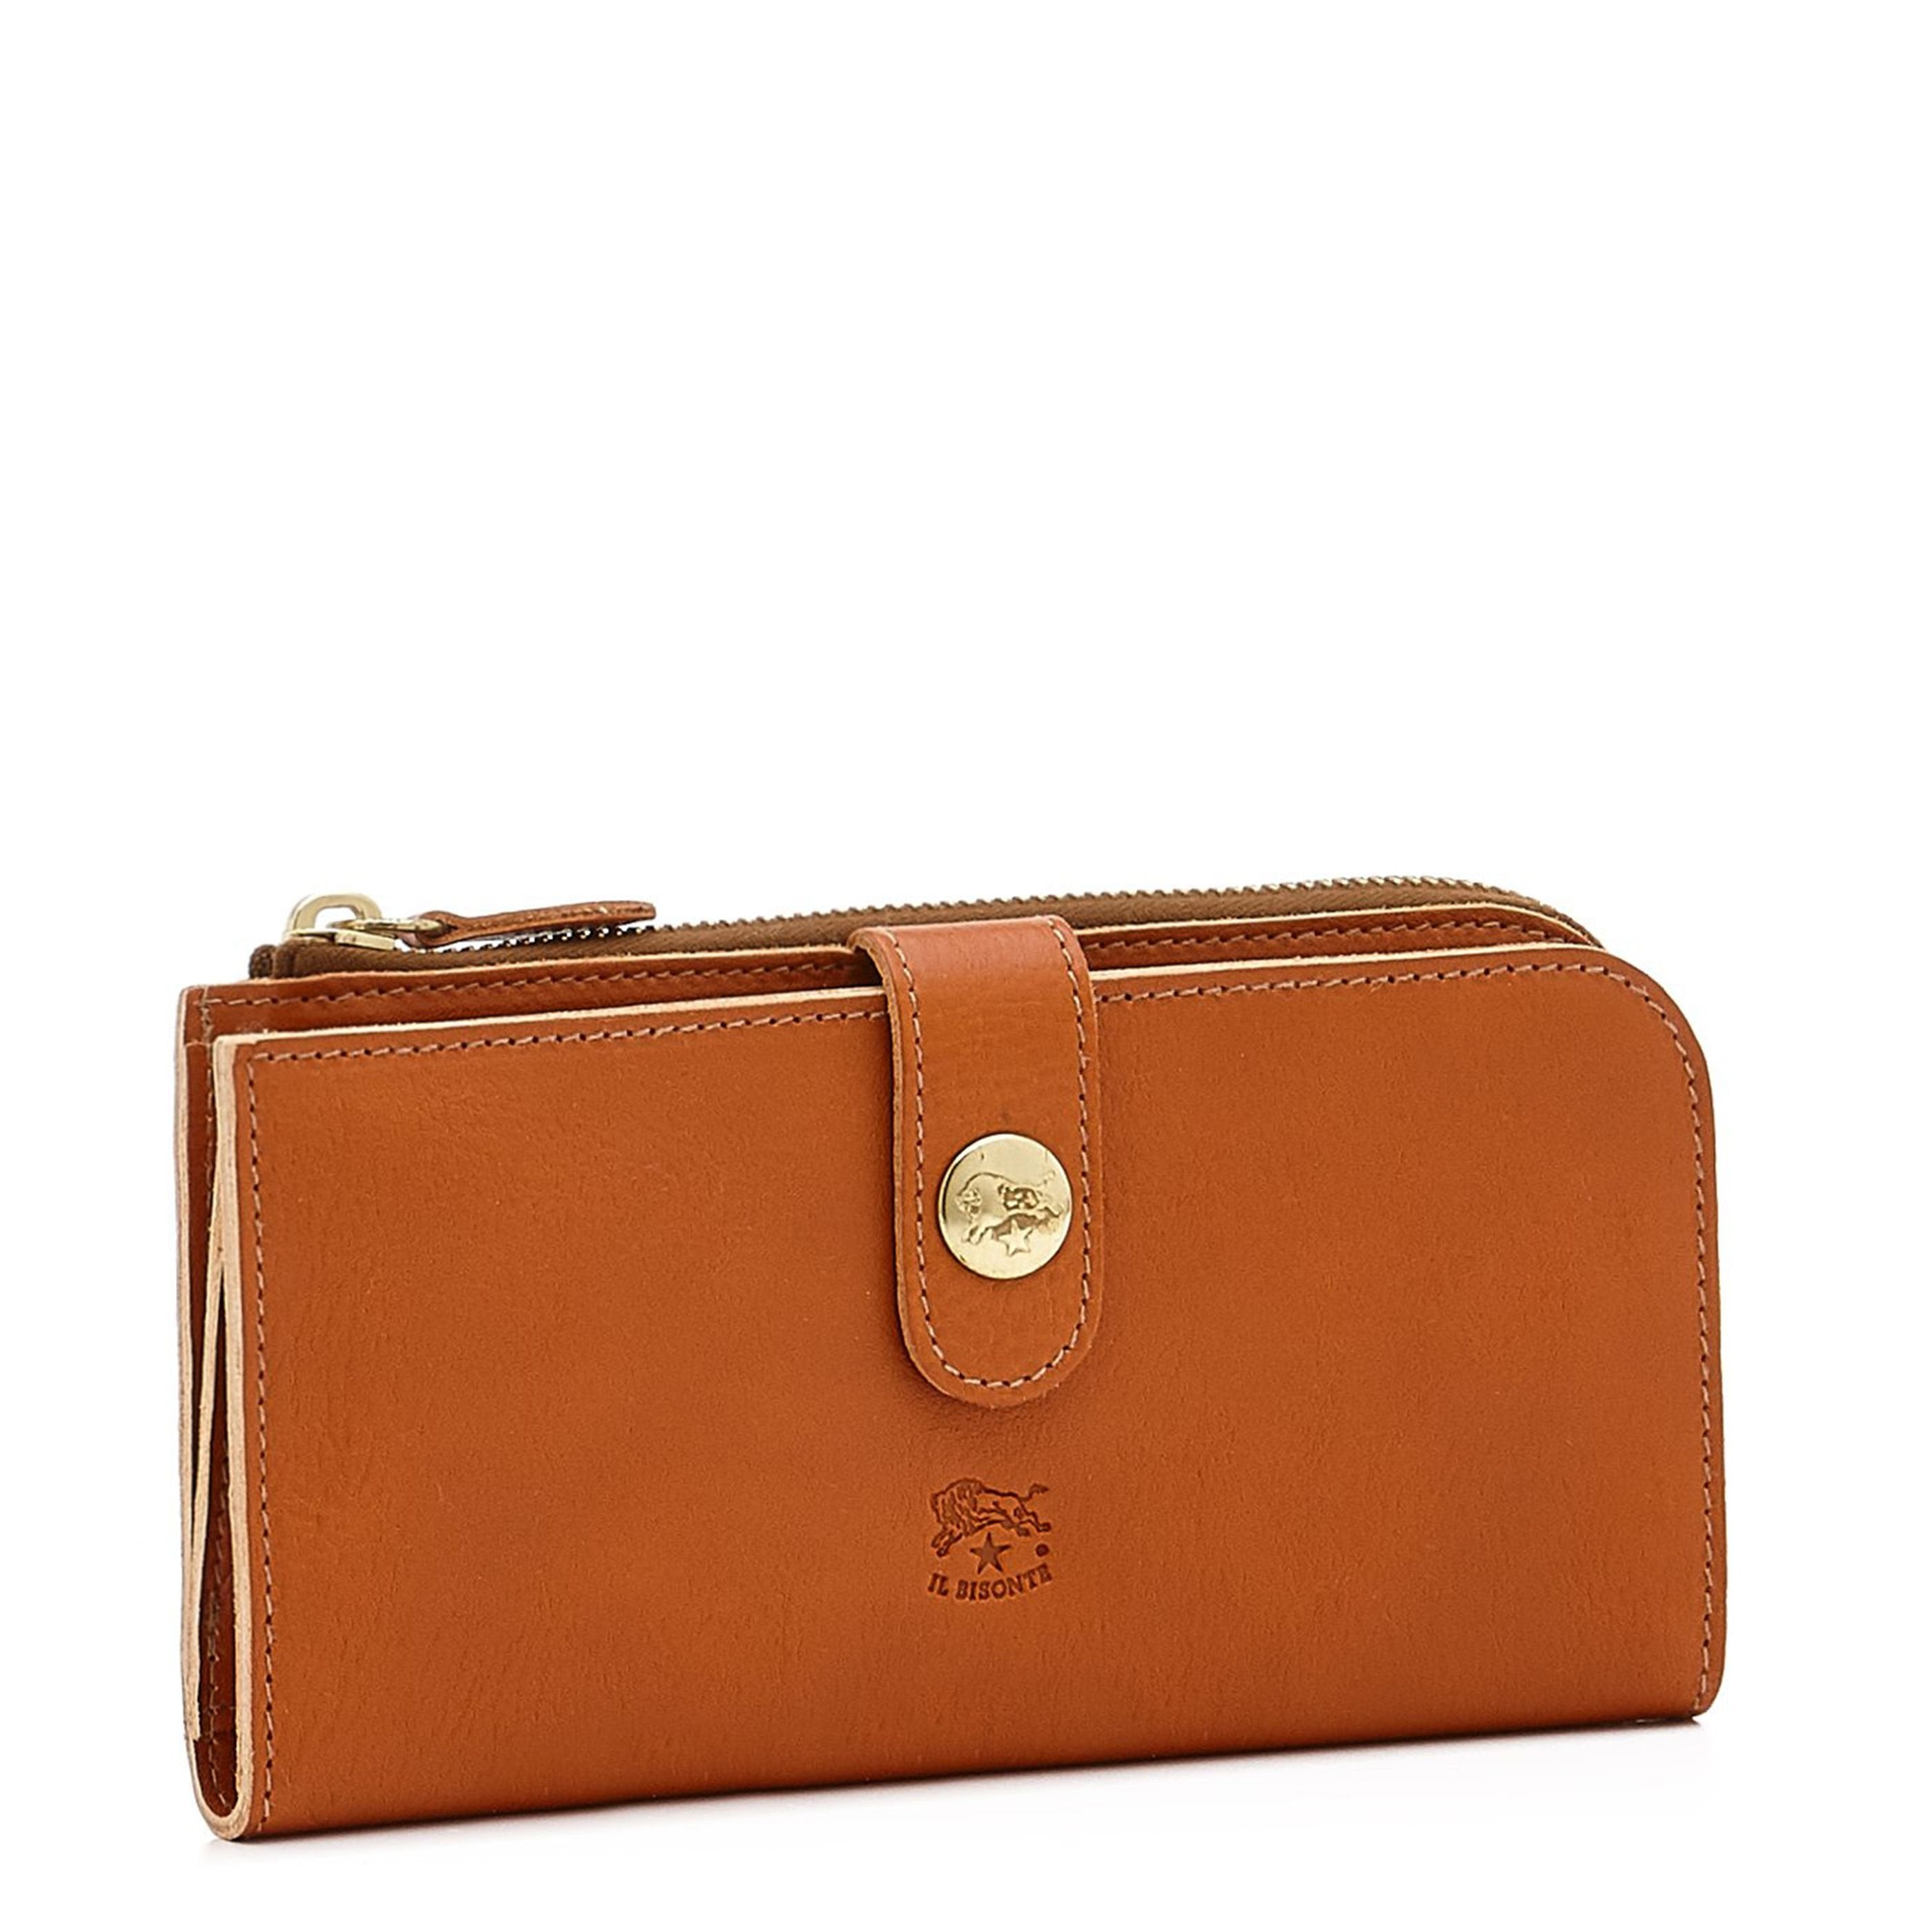 Women's continental wallet in calf leather color caramel